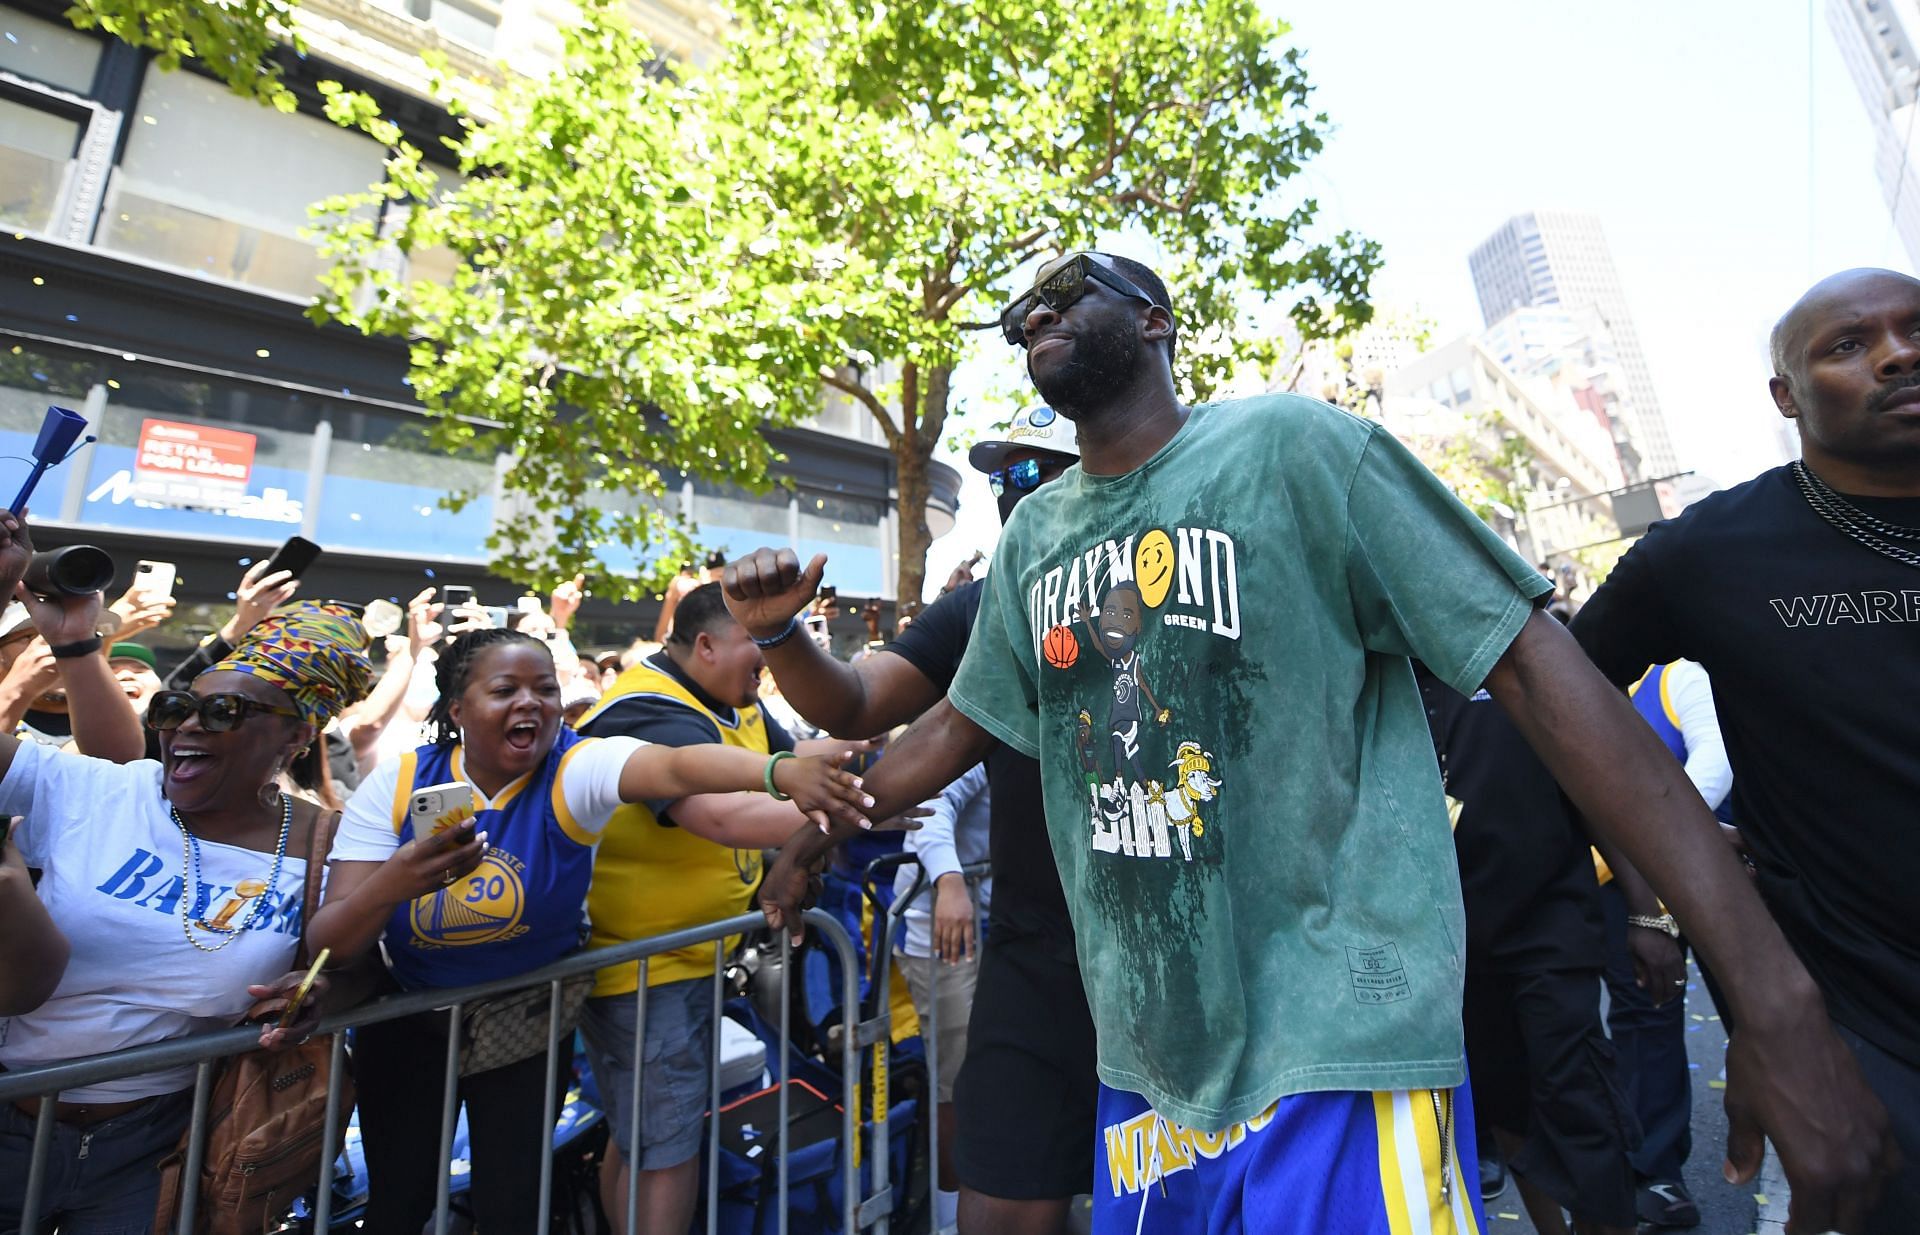 Draymond Green of the Golden State Warriors high fives fans during their victory parade and rally on June 20 in San Francisco, California. The Warriors beat the Boston Celtics 4-2 to win the NBA Finals.